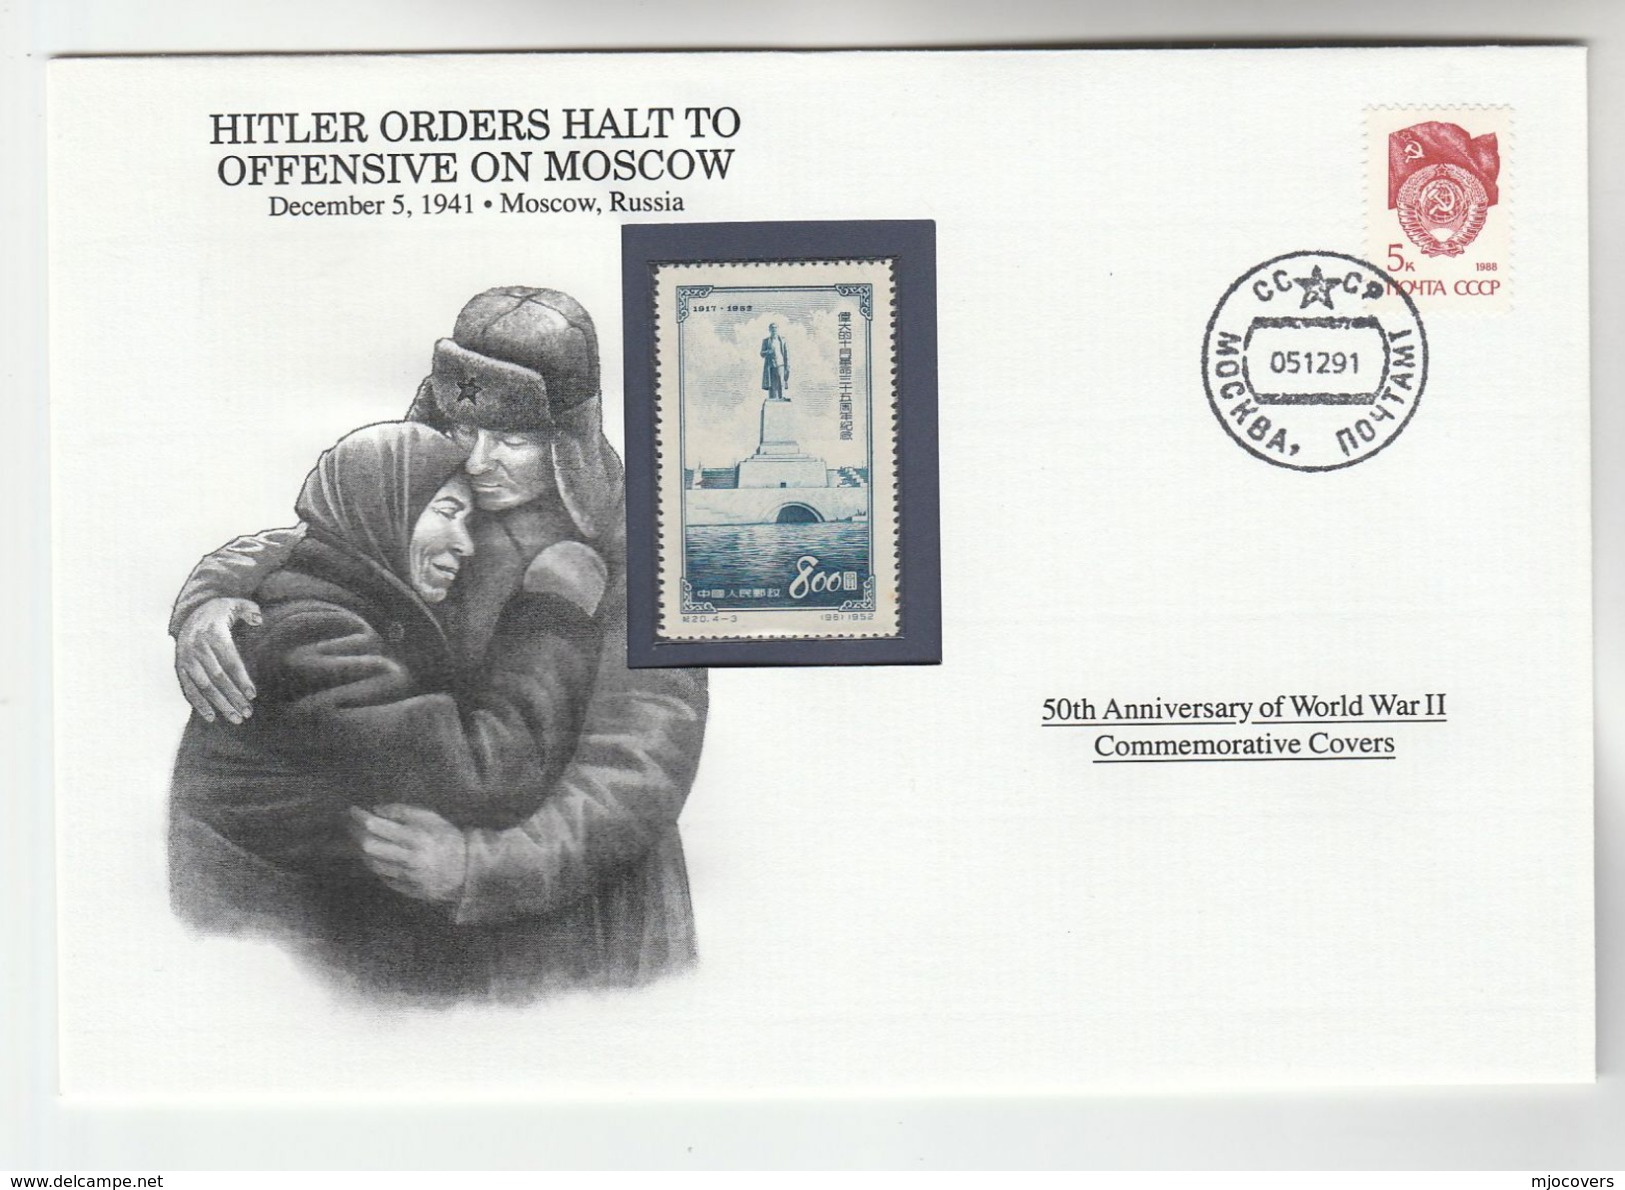 1991 RUSSIA Special COVER Anniv WWII GERMAN MOSCOW  OFFENSIVE HALTED Event Stamps - WW2